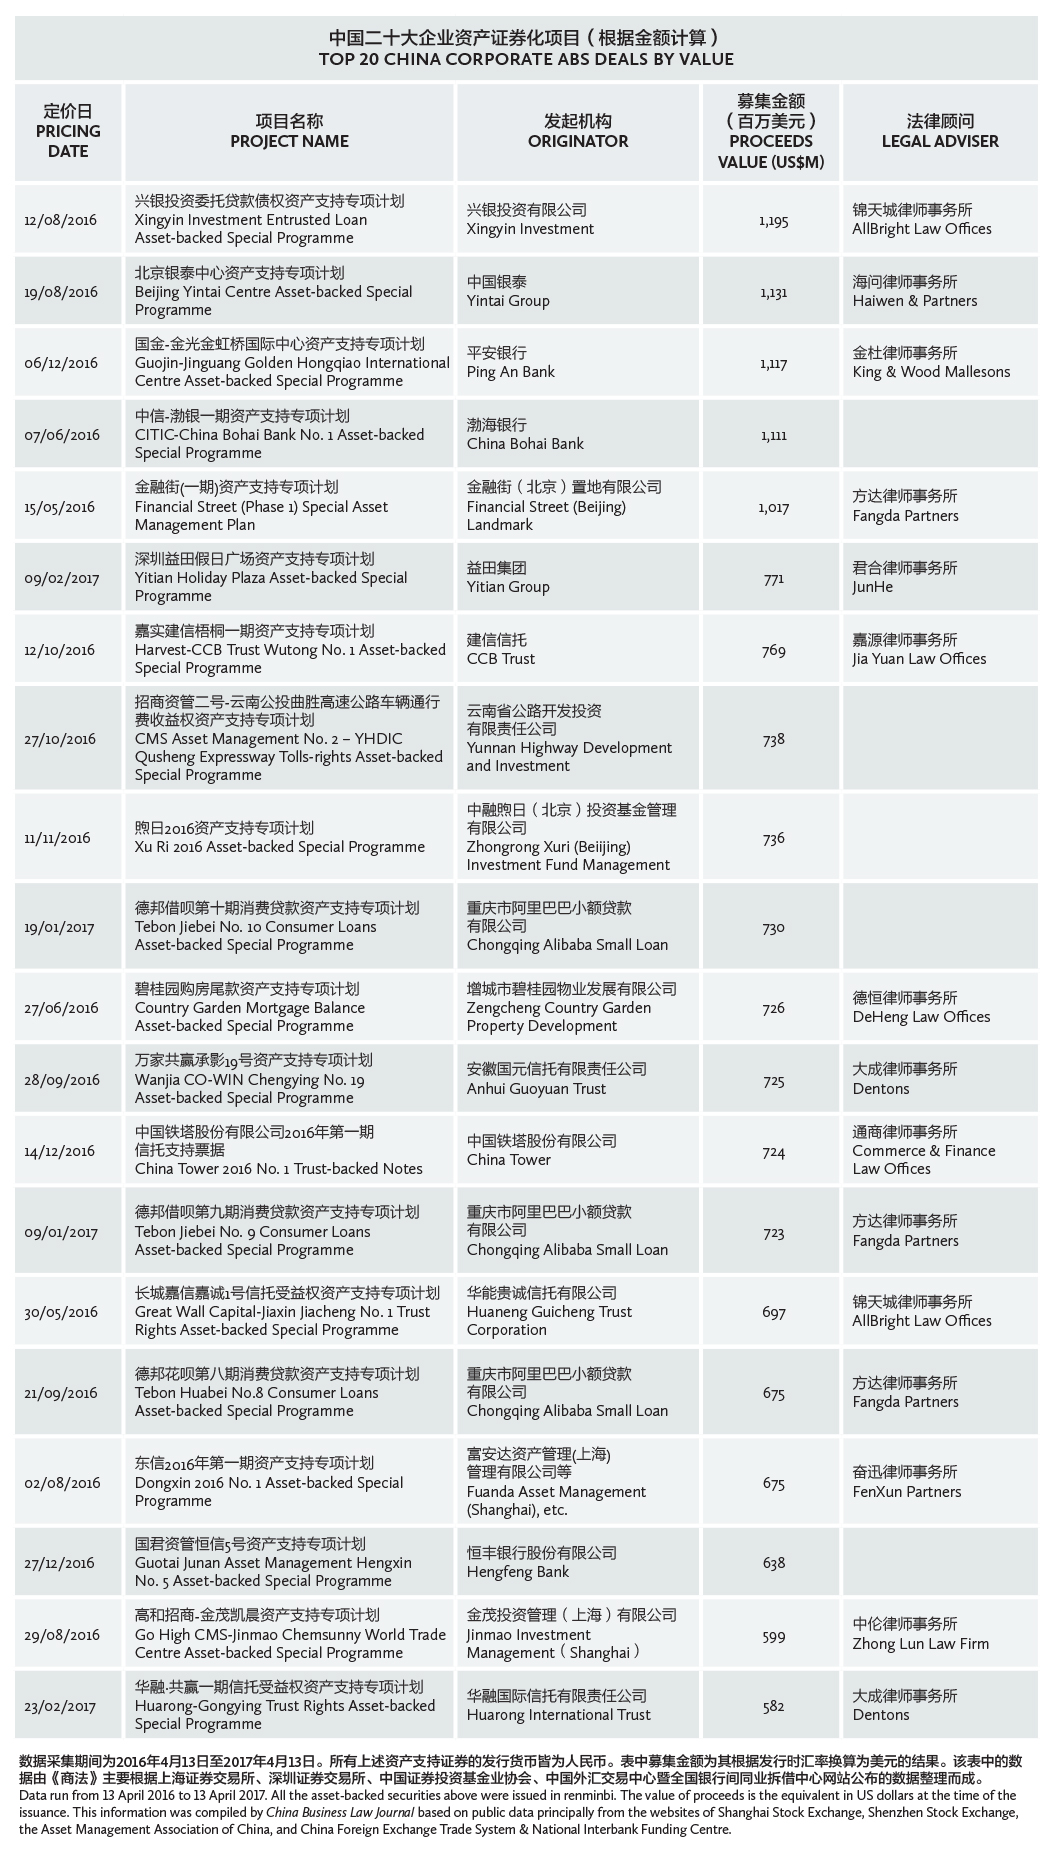 Top 20 China corporate ABS deals by value